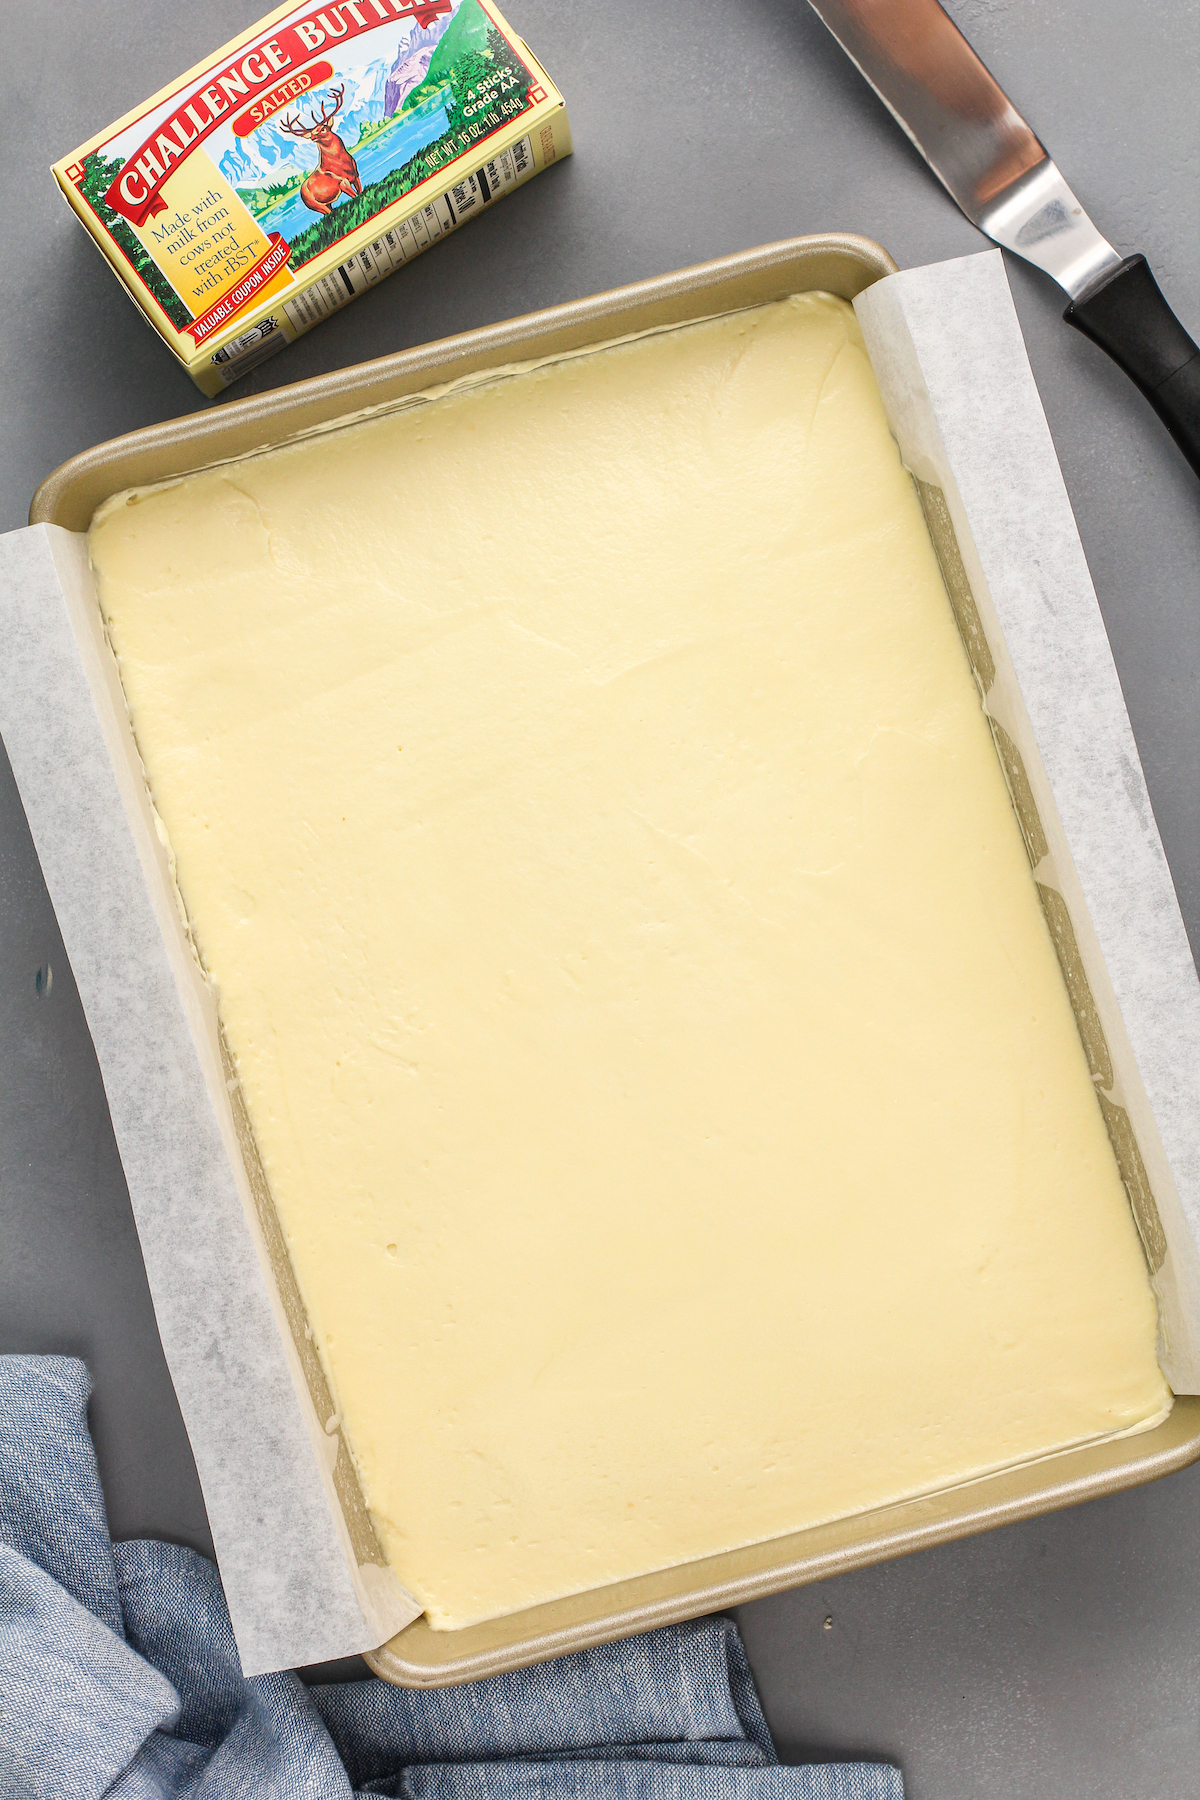 Pudding is spread in an even layer in a baking sheet. 